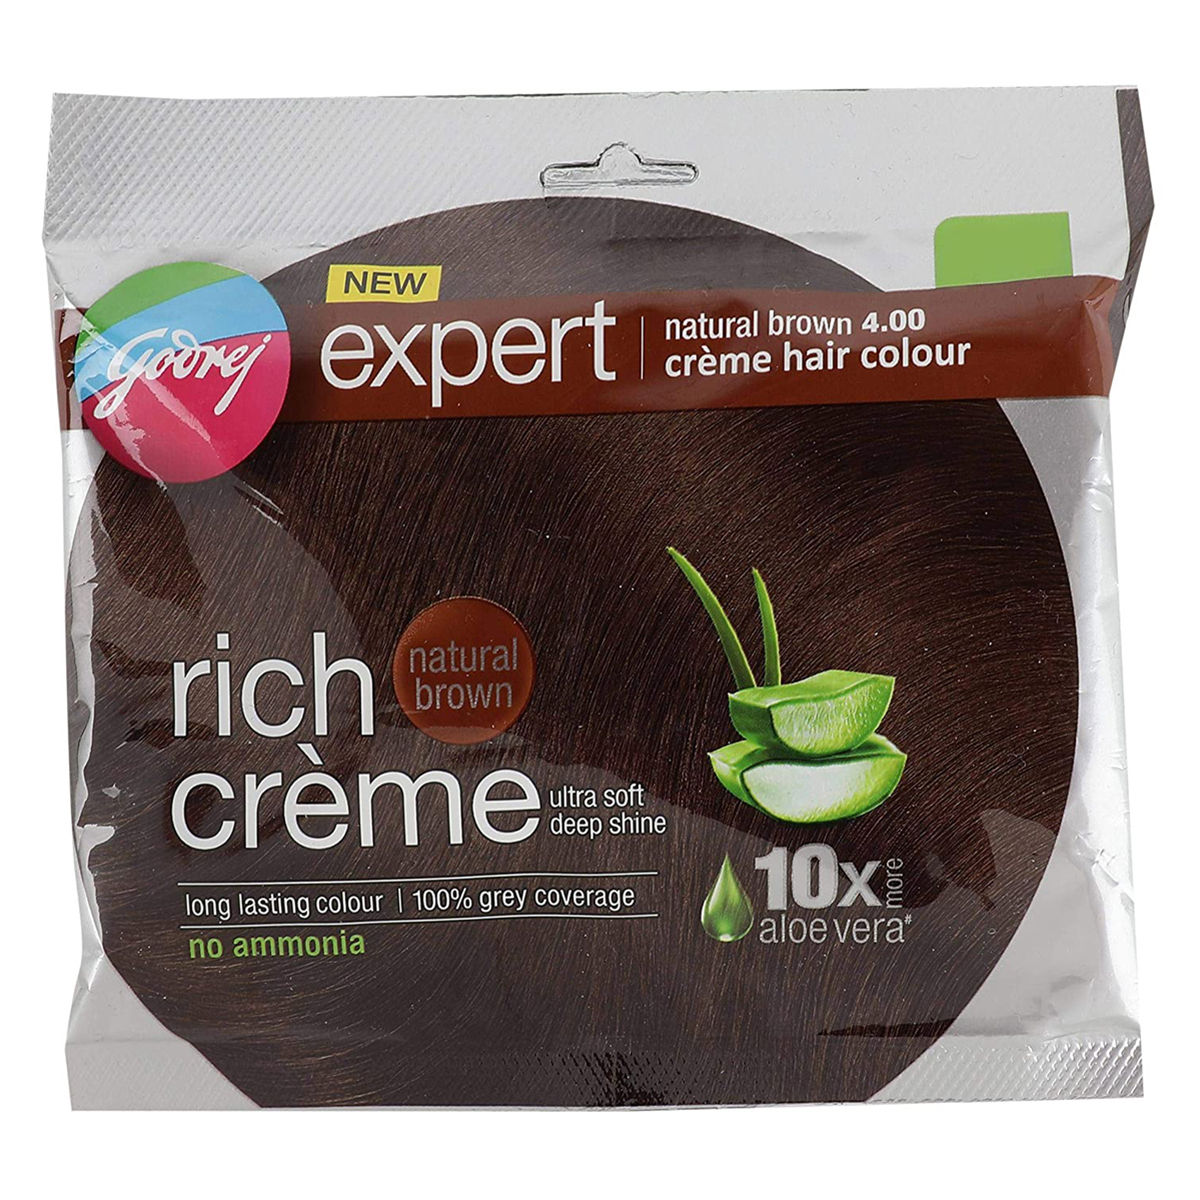 Hair colouring at home made easy with Godrej Expert Rich Crème Hair Colour  - YouTube